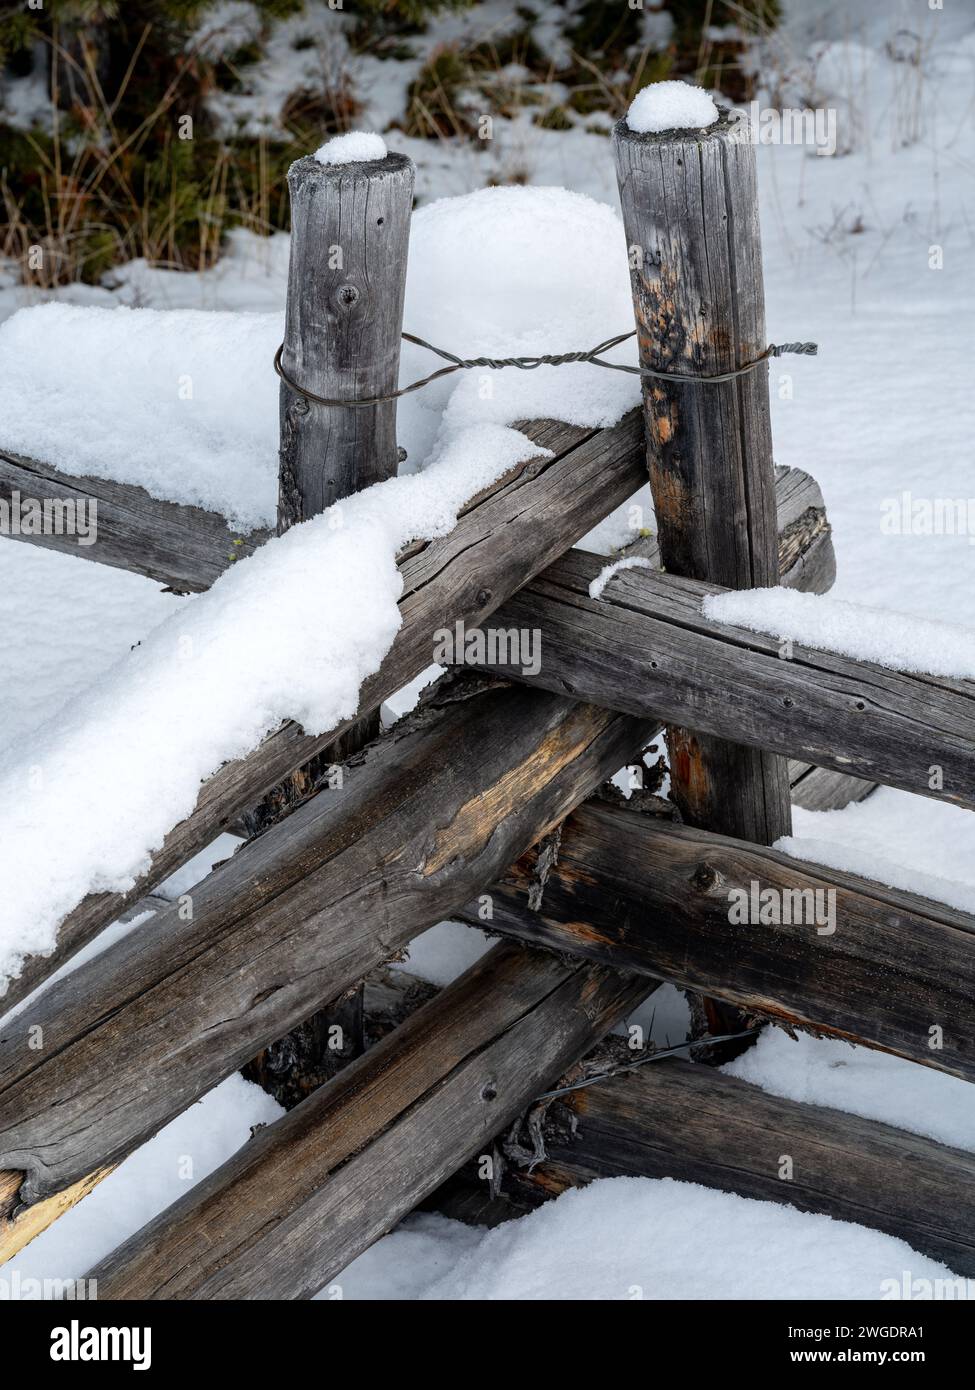 Cold show on a wooden fence in the wilderness Stock Photo